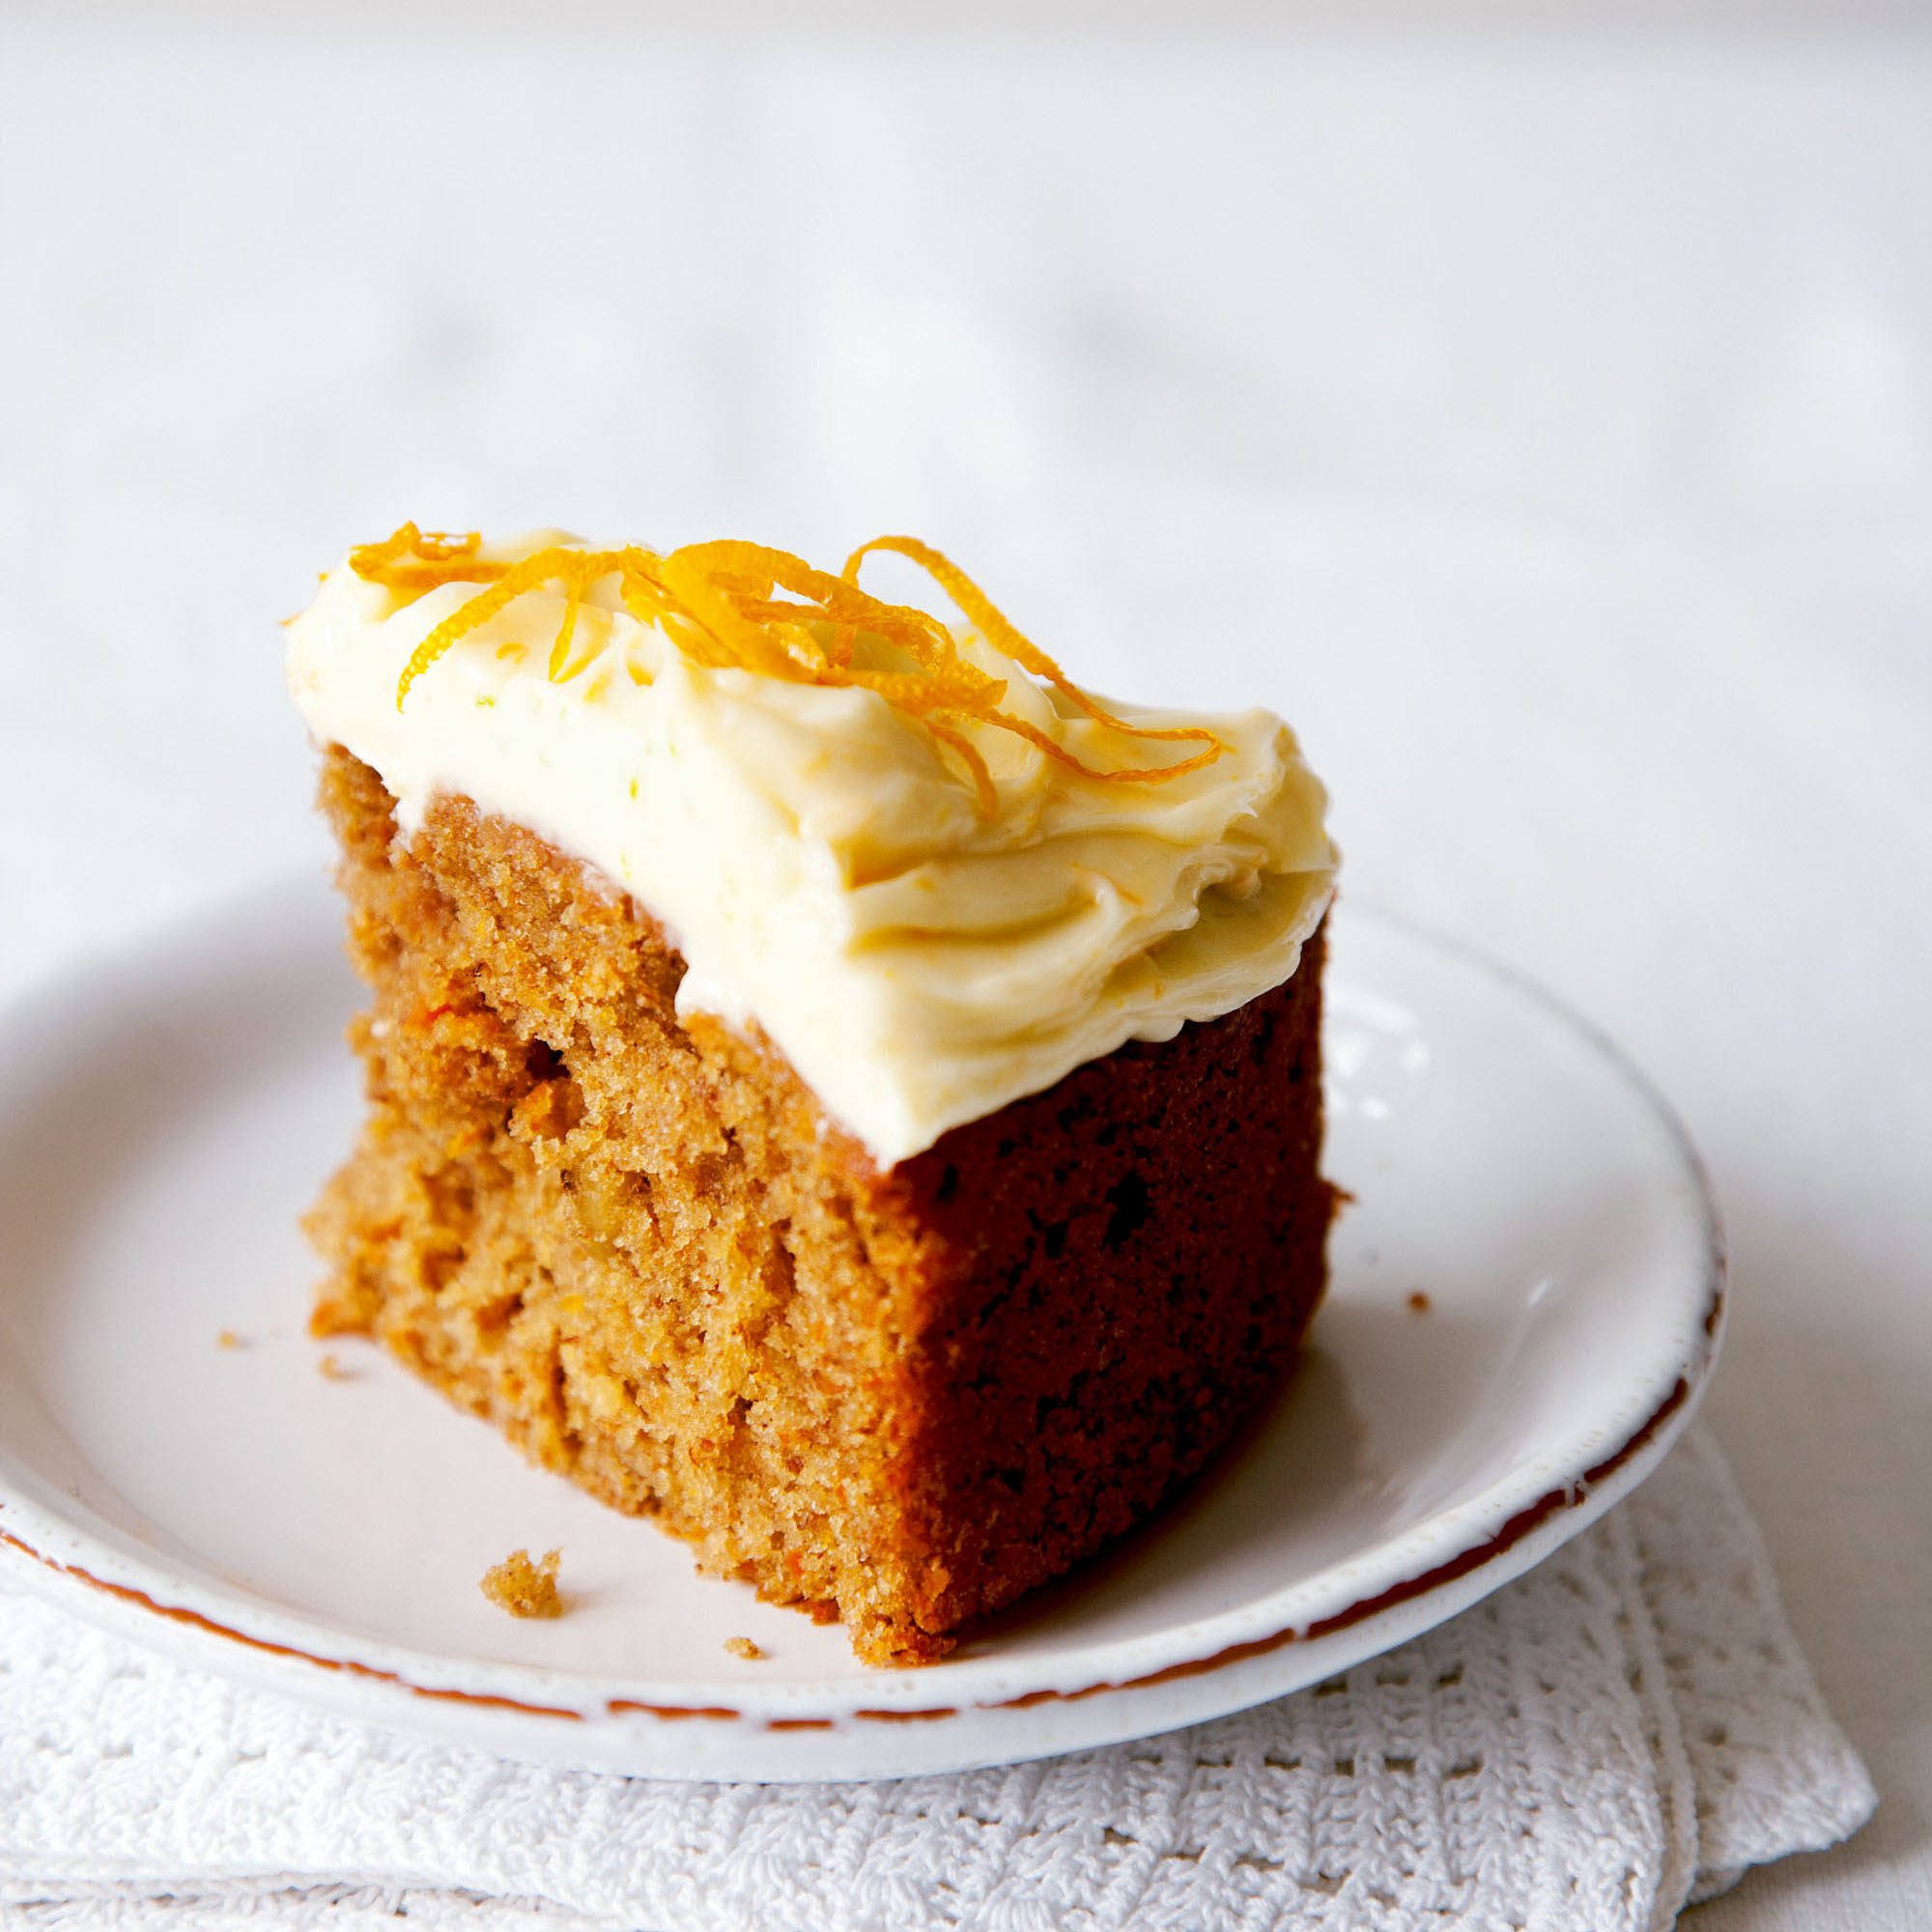 Carrot cake with lemon cream cheese frosting recipe